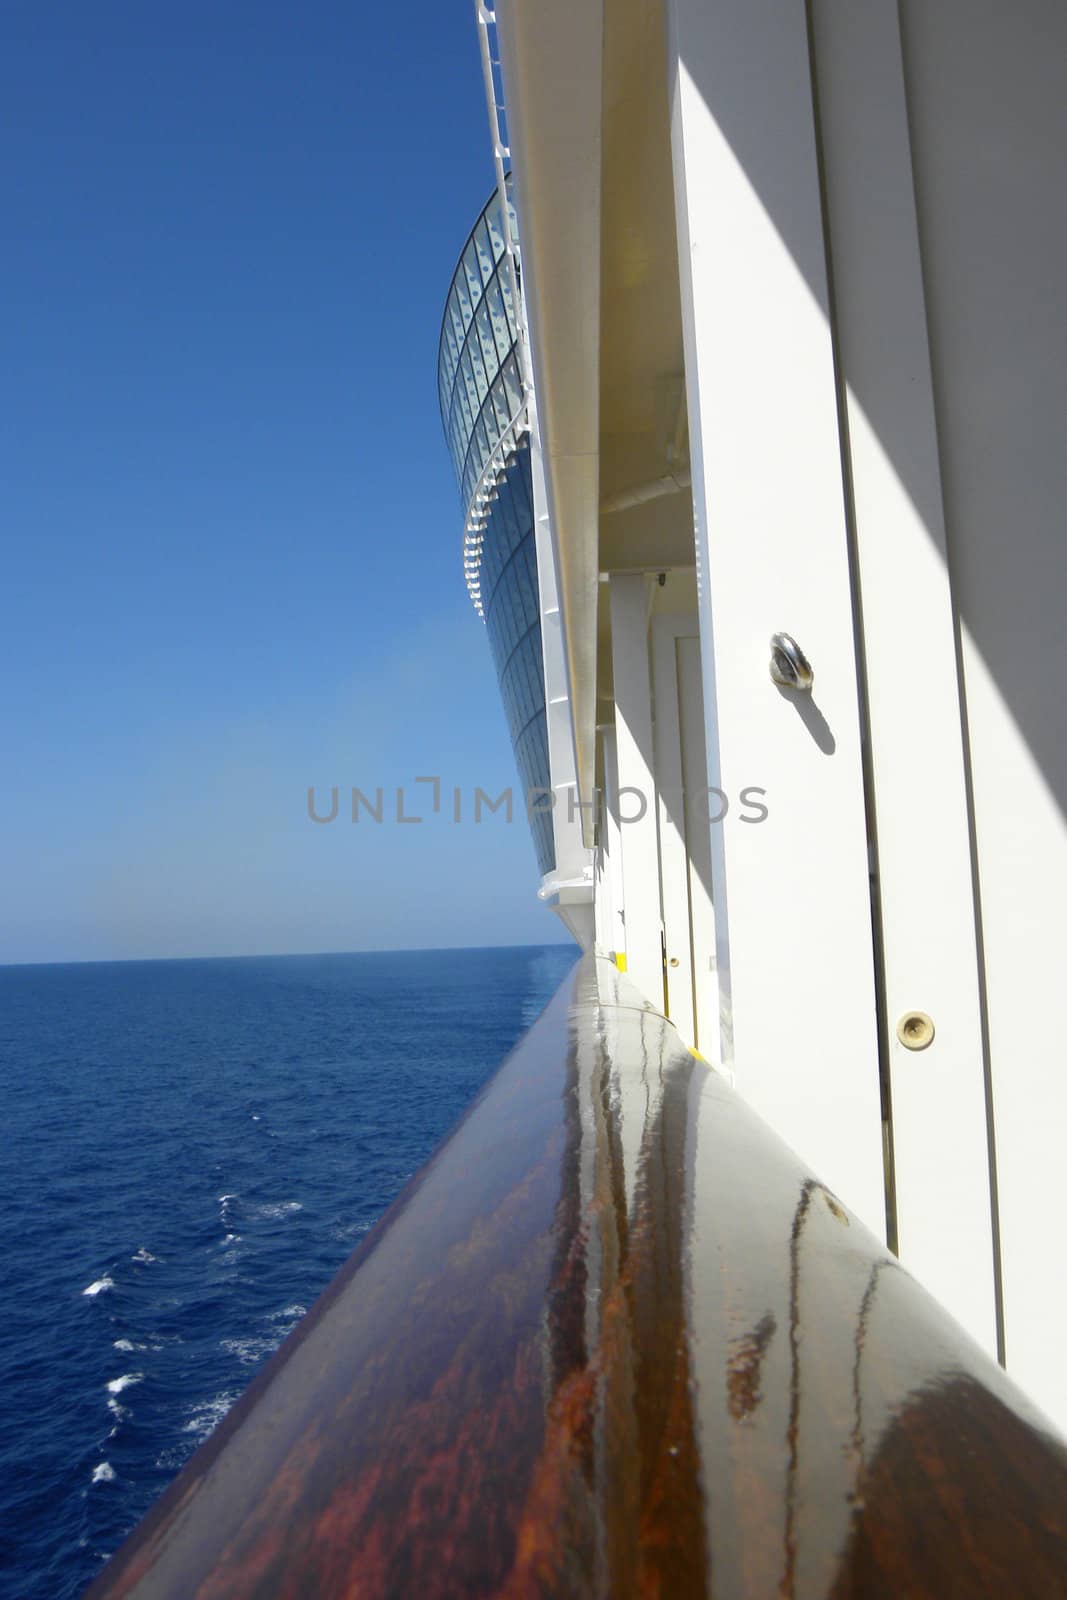 Superb view from a ship by Bestpictures